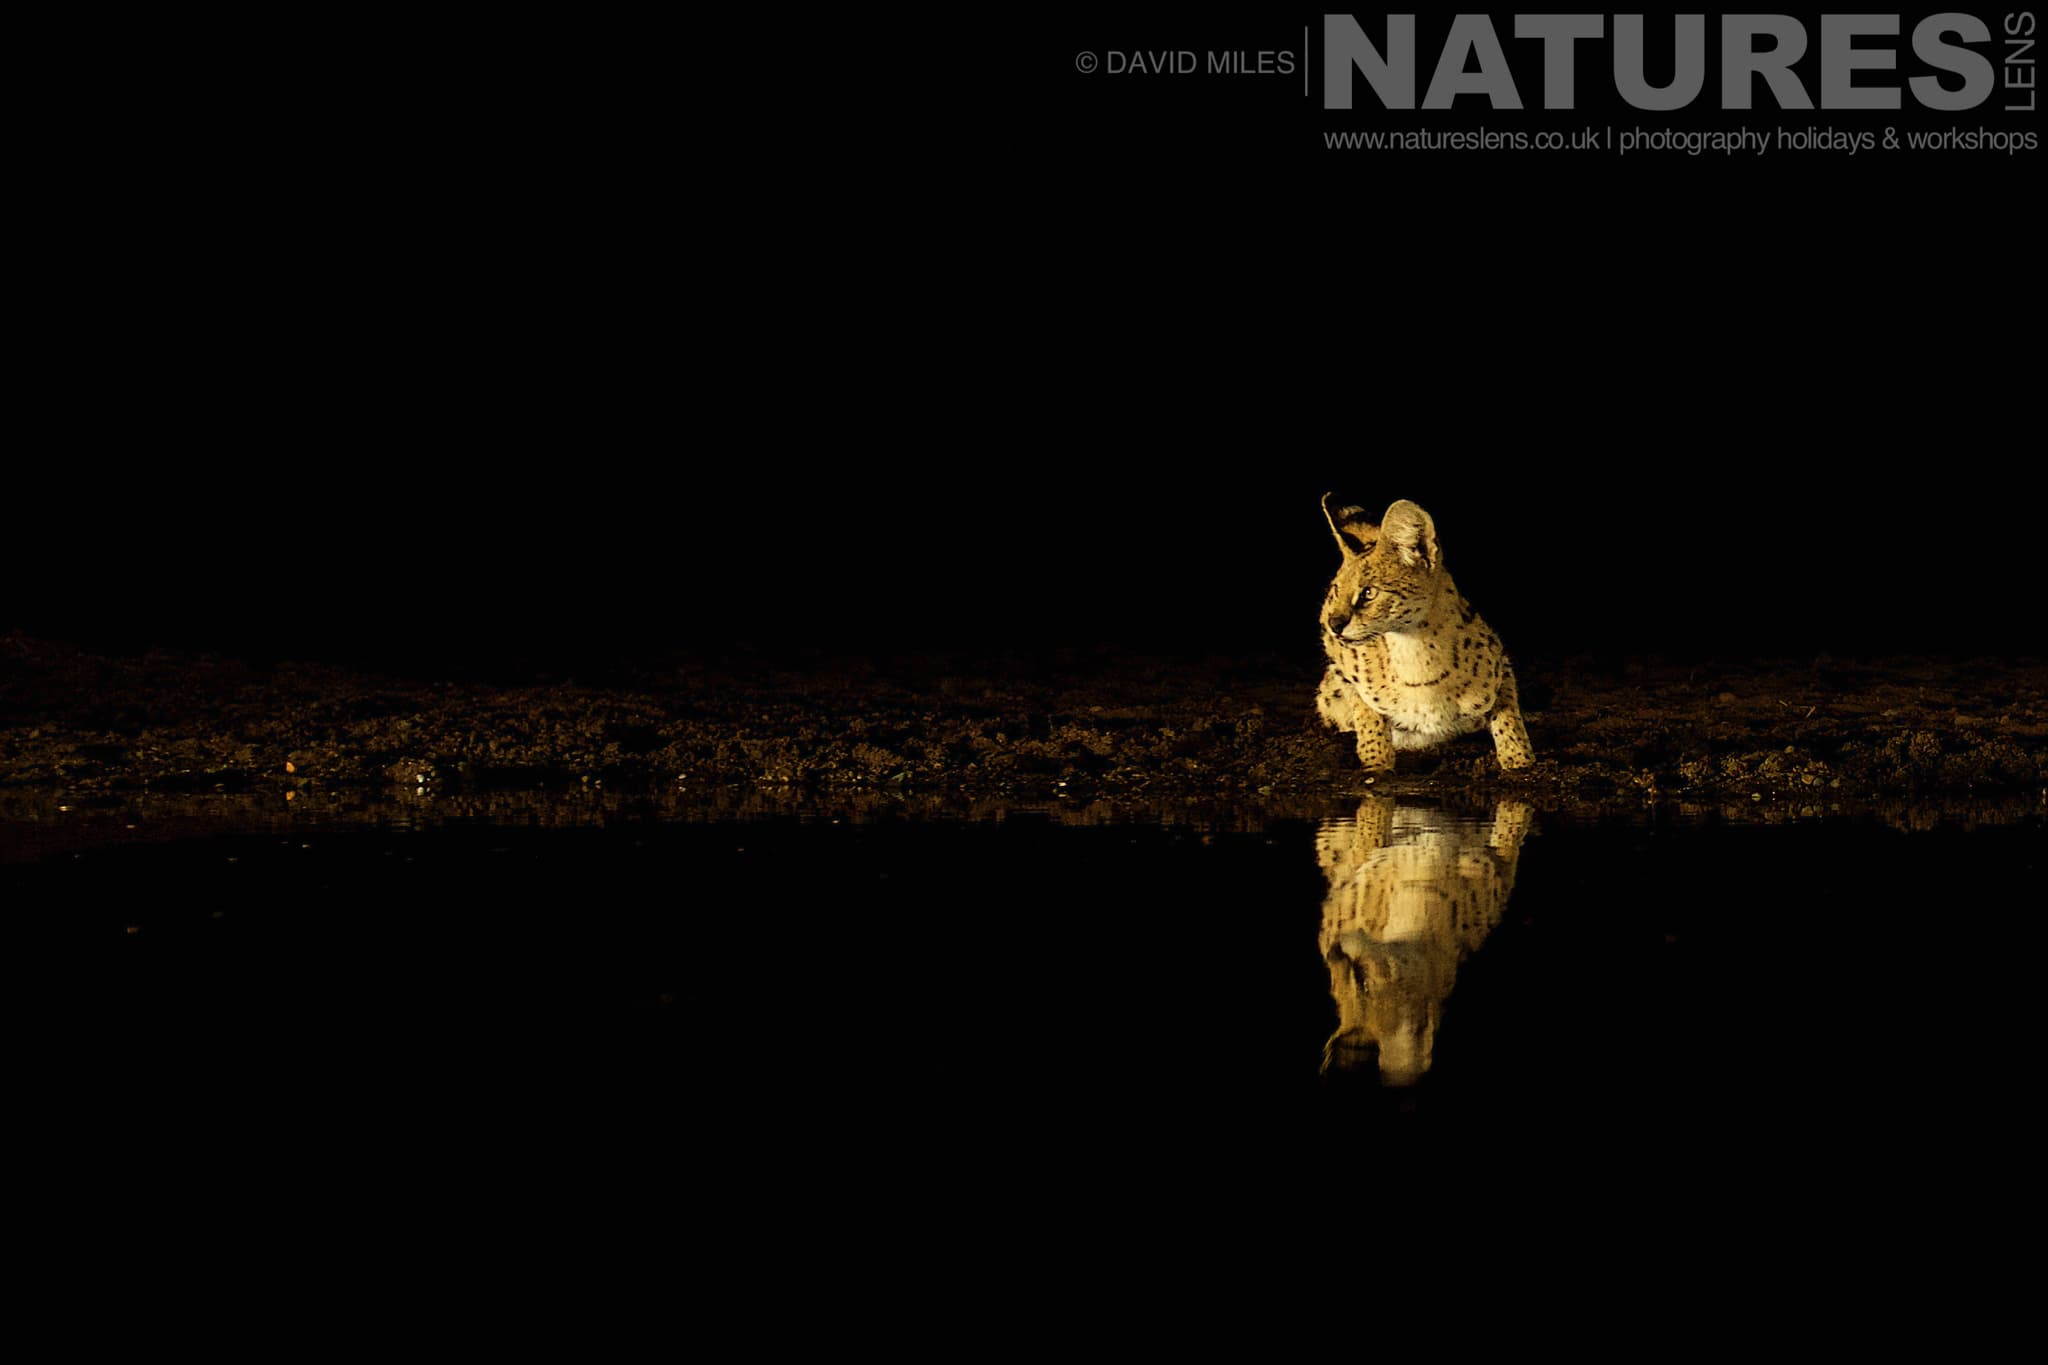 A Lone Serval Cat At One Of The Night Hides One Of The Species That Makes Up The Awe Inspiring Wildlife Of Zimanga